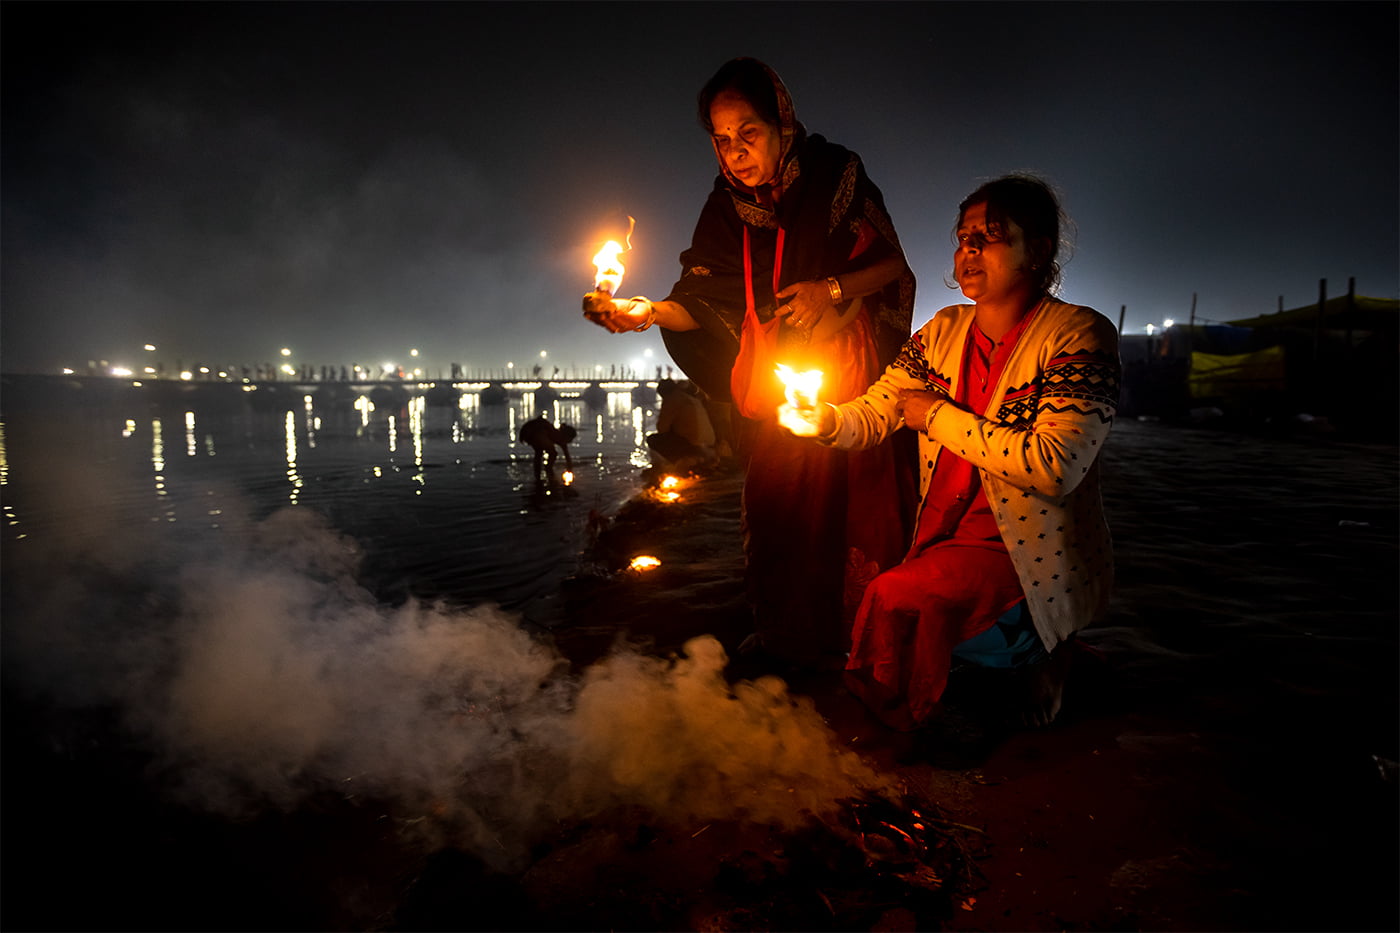 A mother and her daughter are performing Sondhi Puja (Evening Puja) on the Ganges in the 2019 Kumbh Mela.